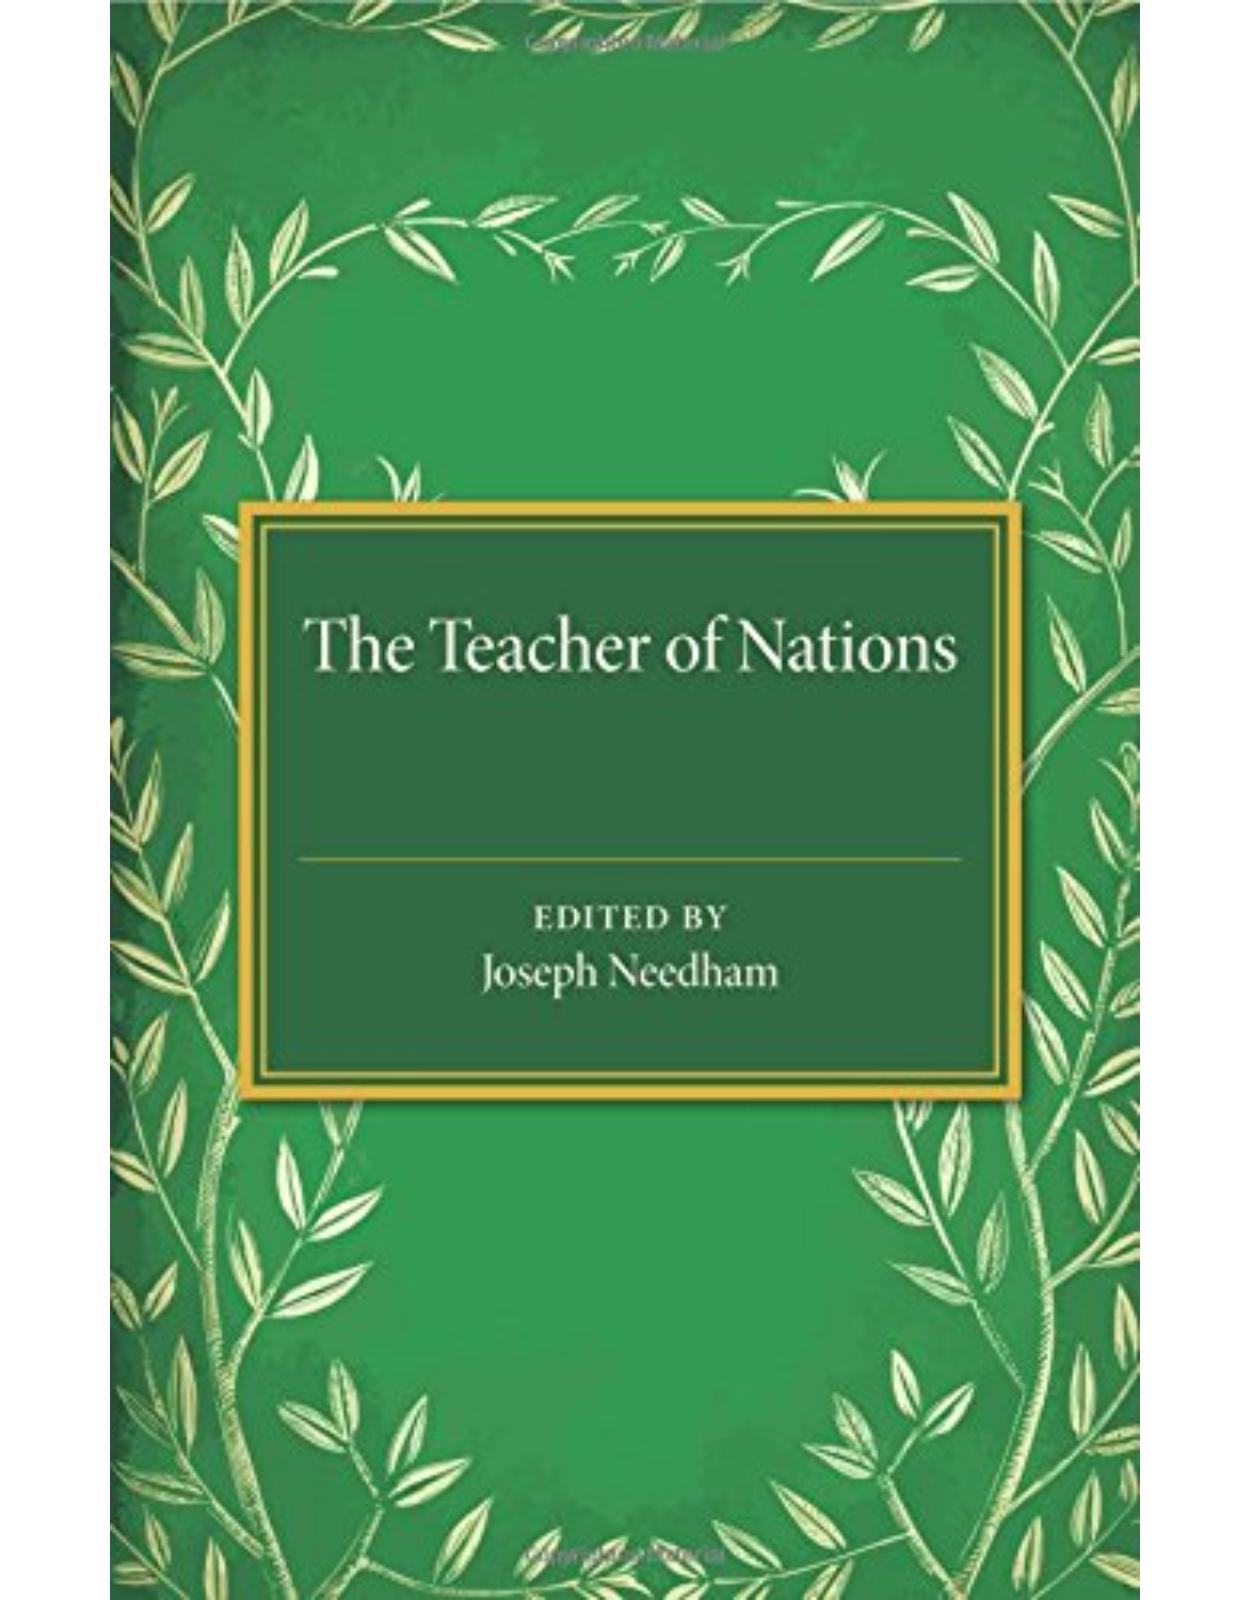 The Teacher of Nations: Addresses and Essays in Commemoration of the Visit to England of the Great Czech Educationalist Jan Amos Komensky (Comenius)